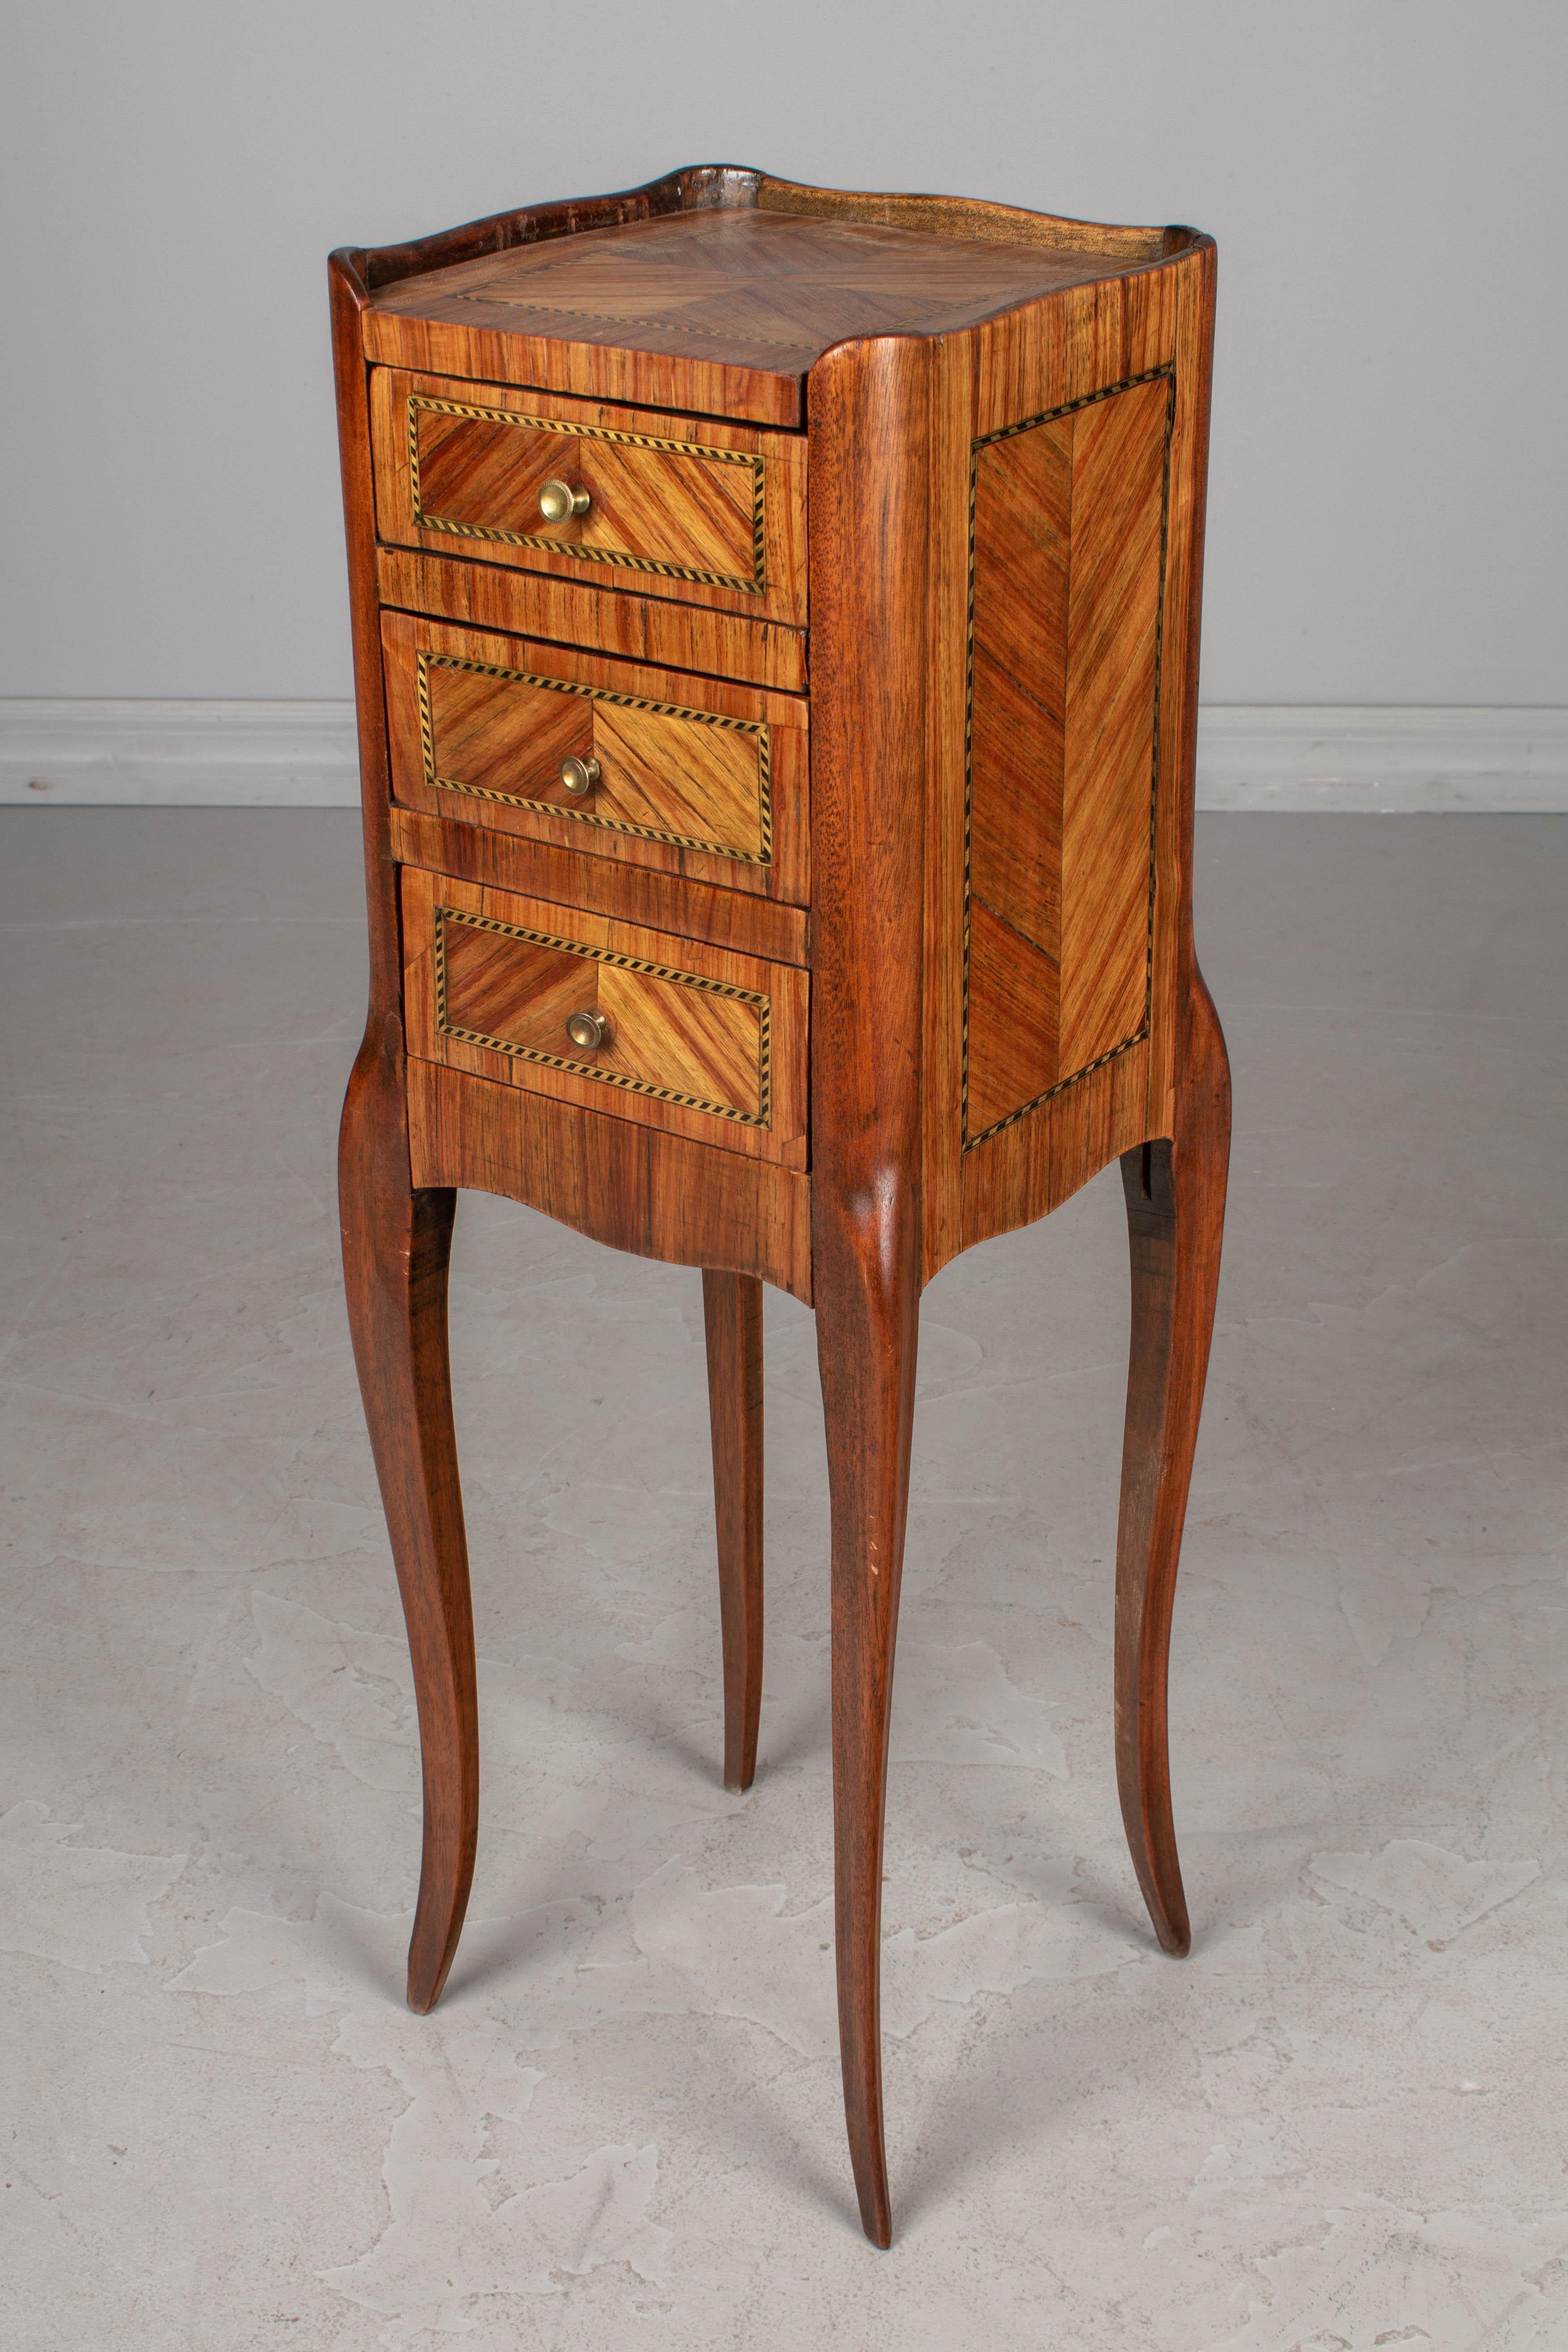 A small, elegant Louis XV style French marquetry side table, or night stand with veneers of walnut and mahogany inlaid in a chevron pattern. Three dovetailed drawers with brass pulls. Tall, slim proportions with curved corners and slender legs.